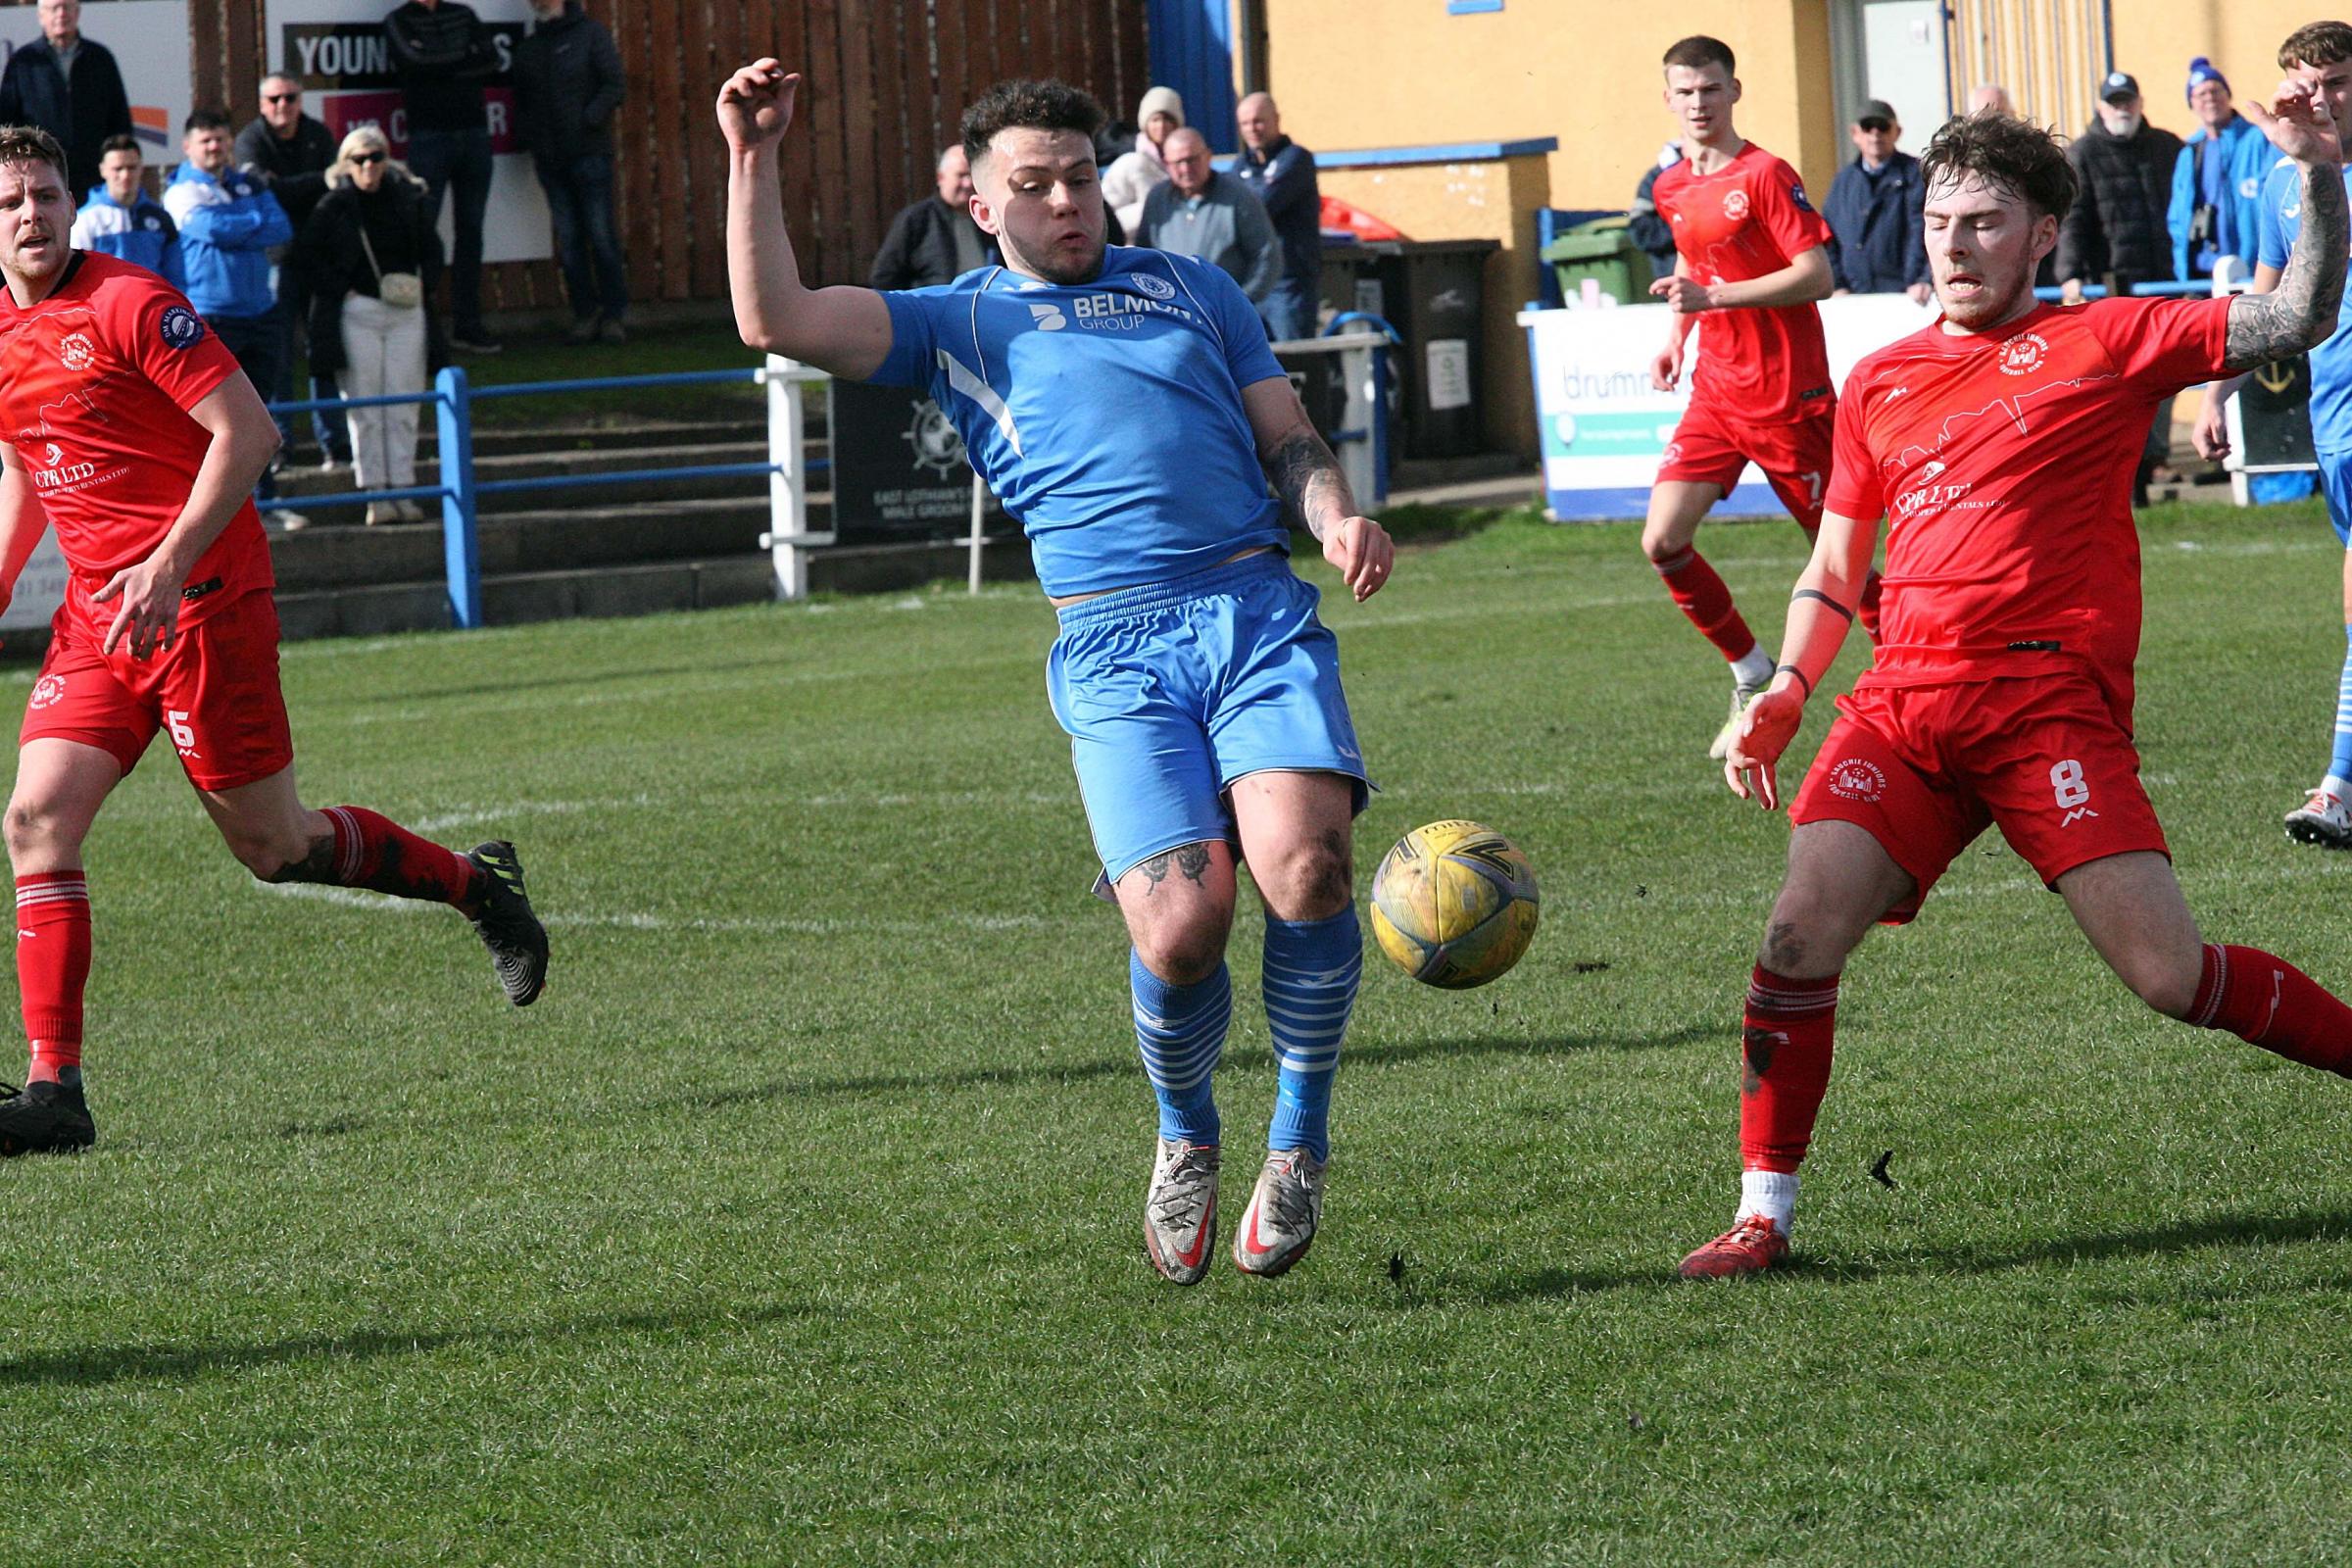 Musselburgh Athletic (blue) are at home to Dundonald Bluebell